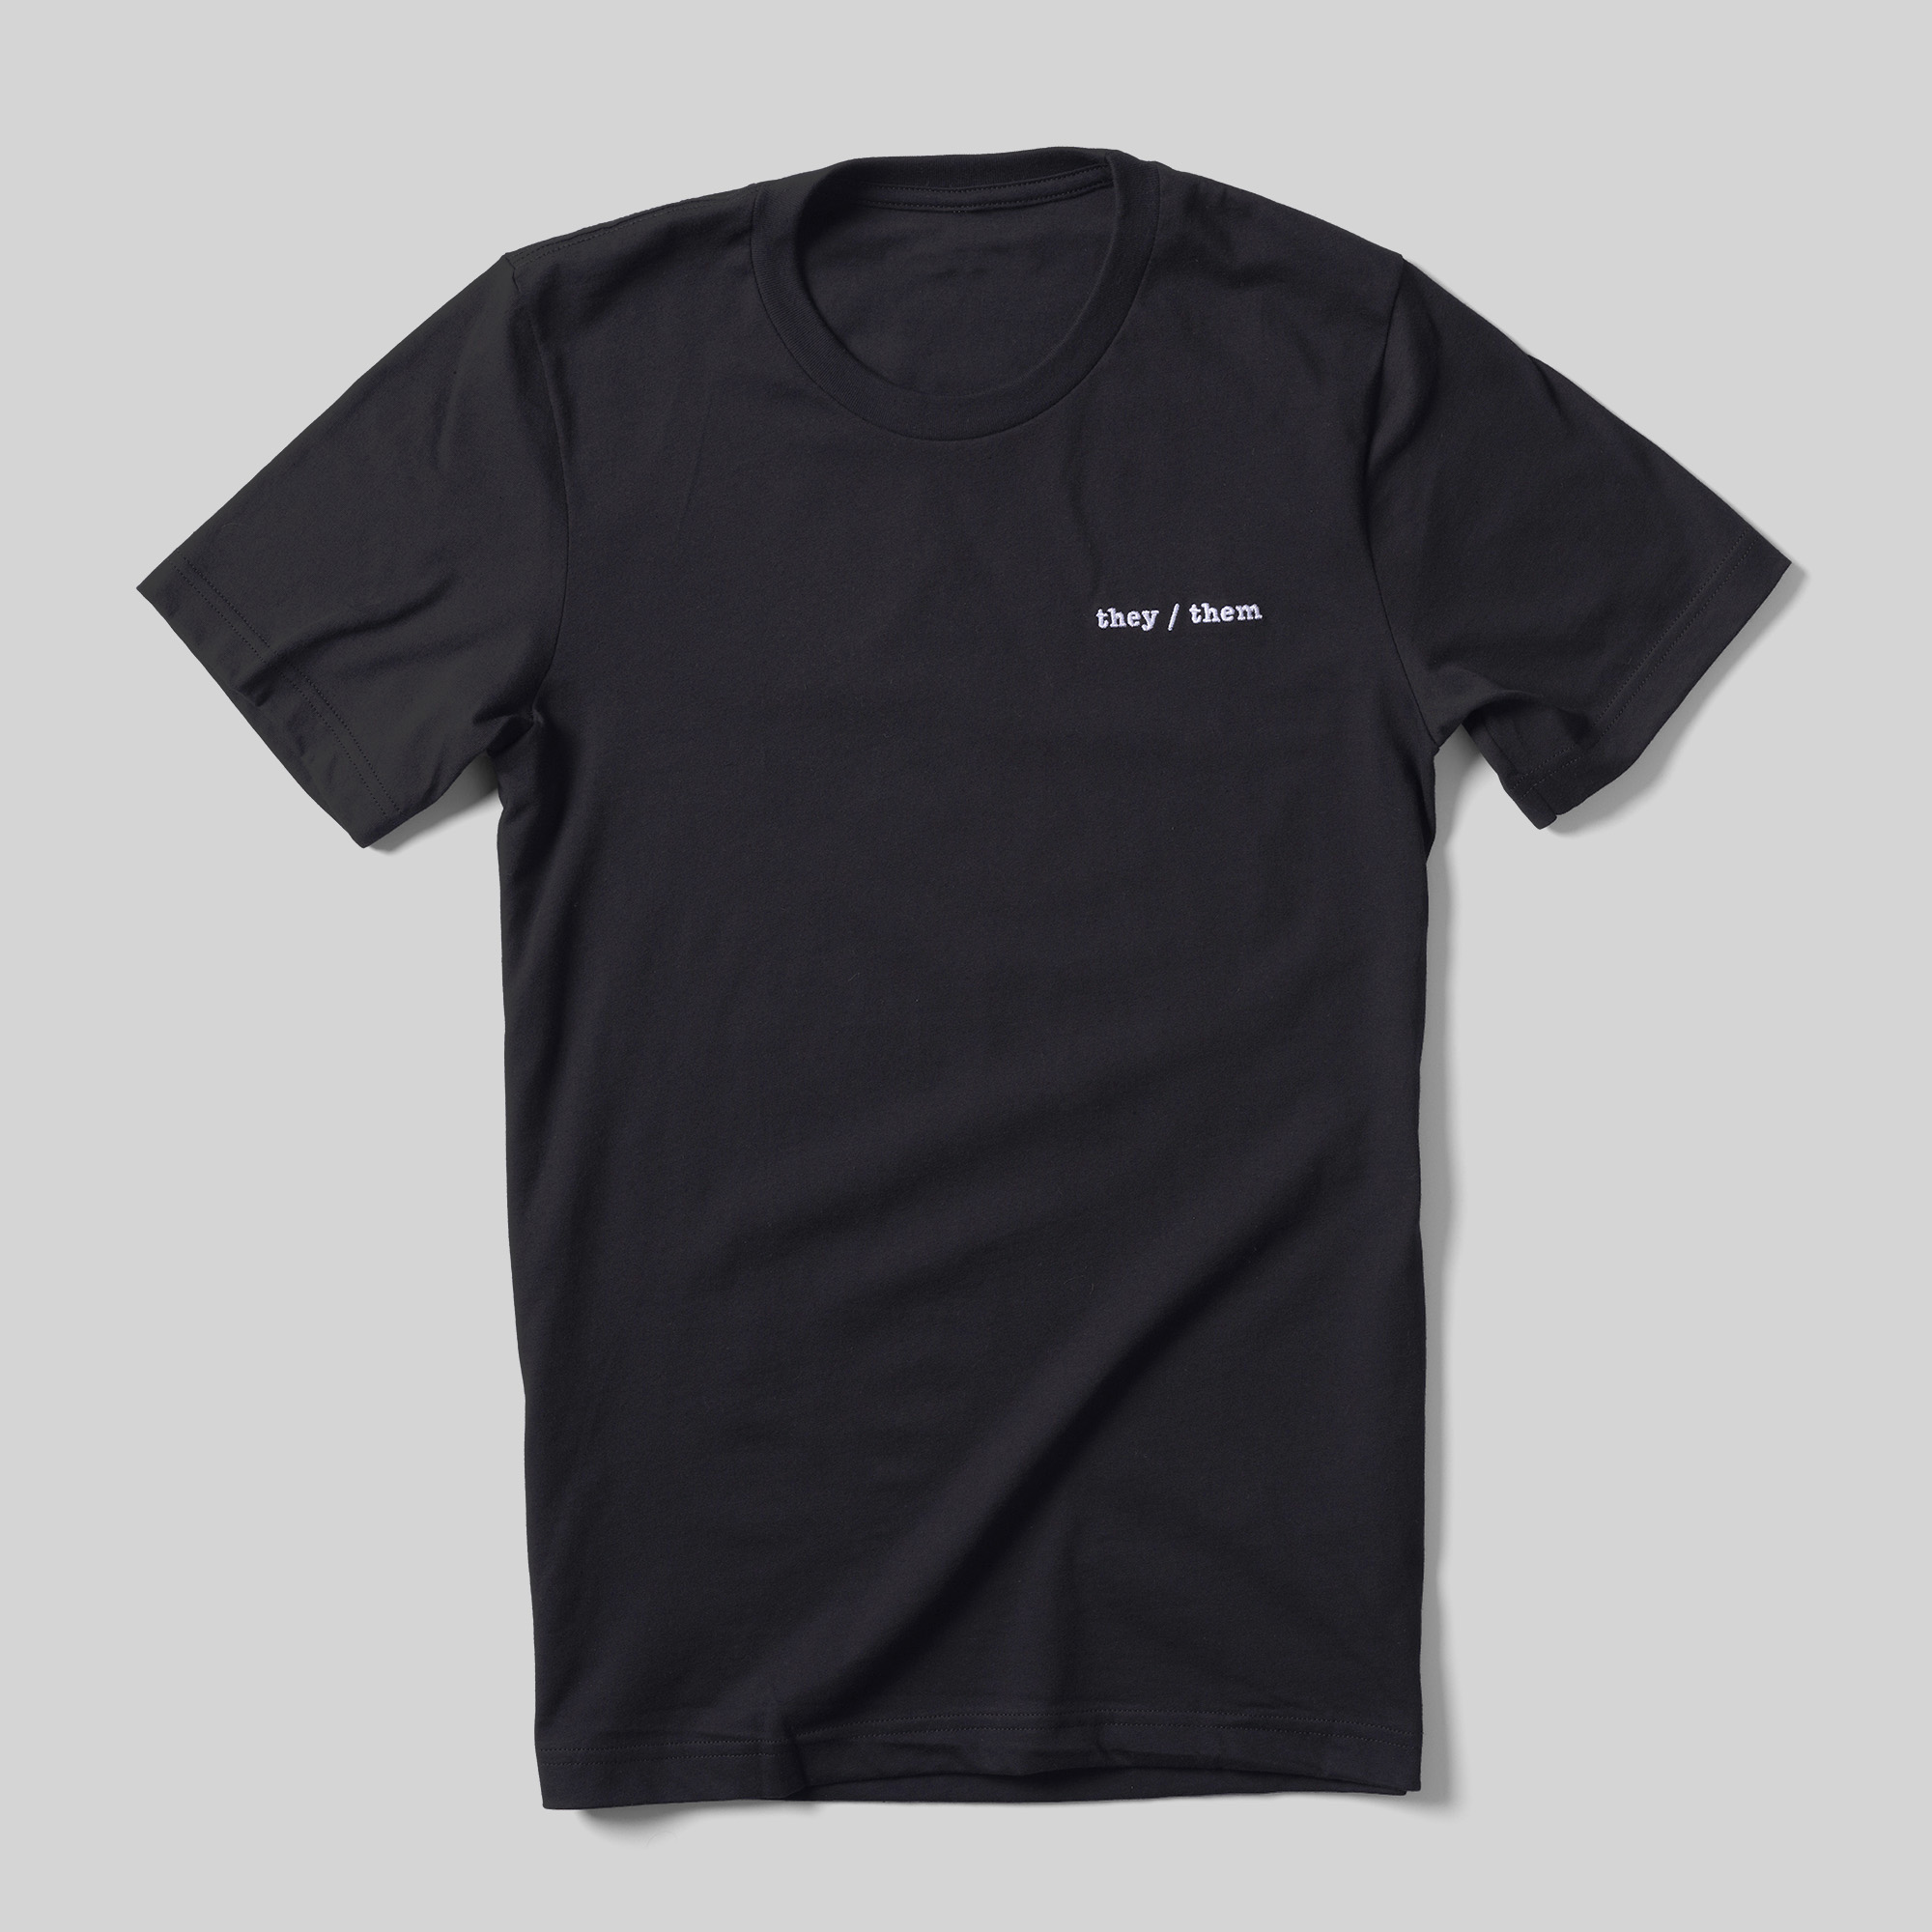 A black t-shirt with "they/them" printed on the left chest area.